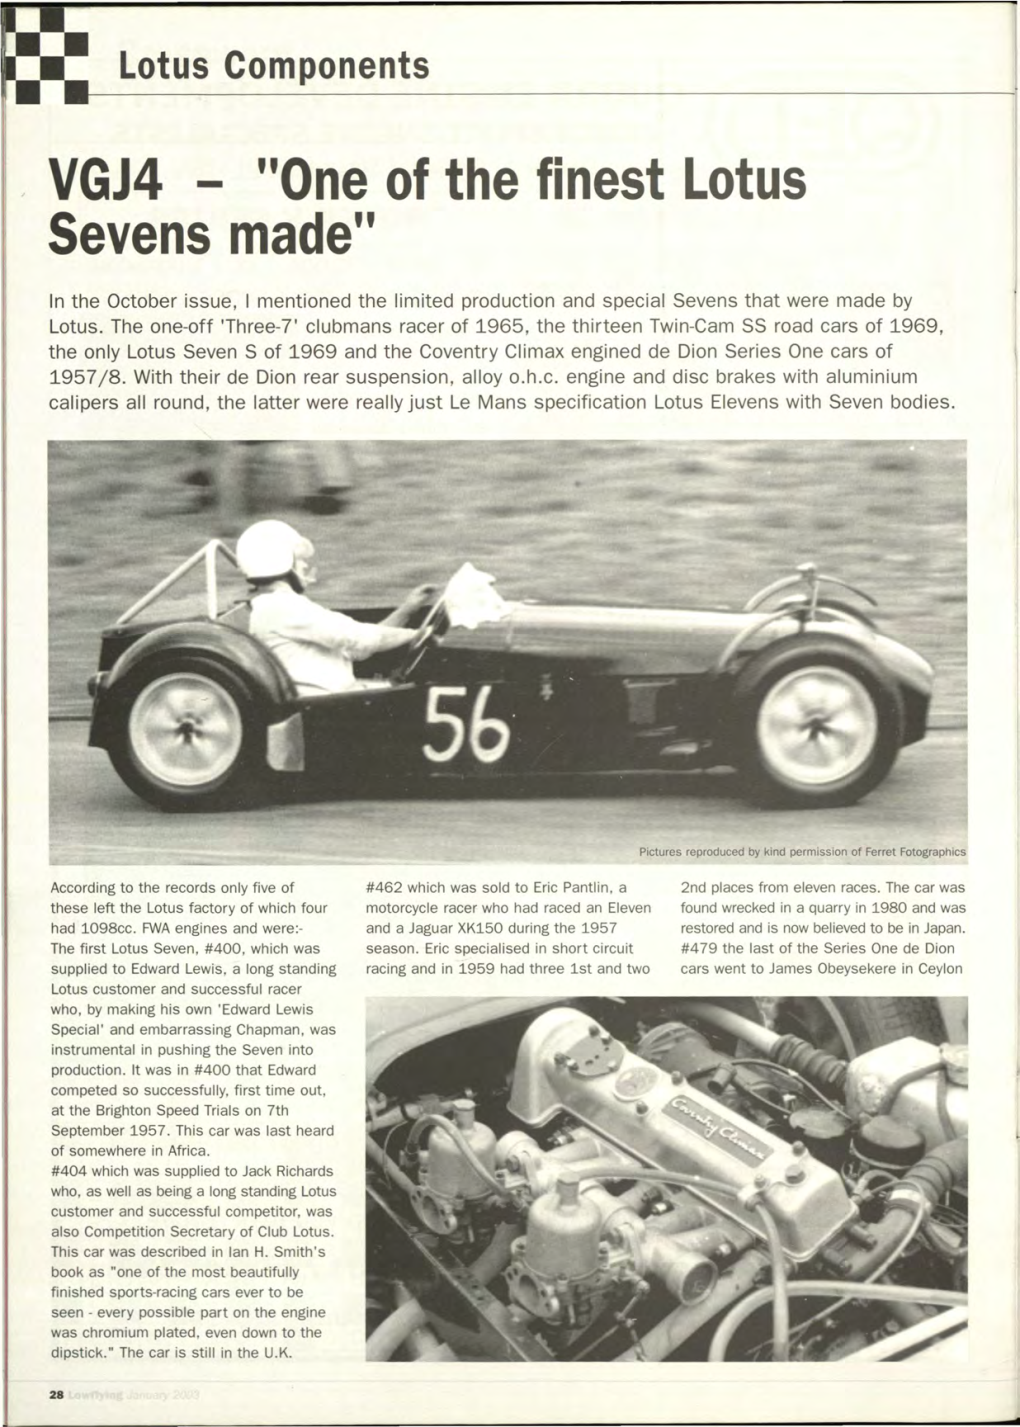 VGJ4 - "One of the Finest Lotus Sevens Made"